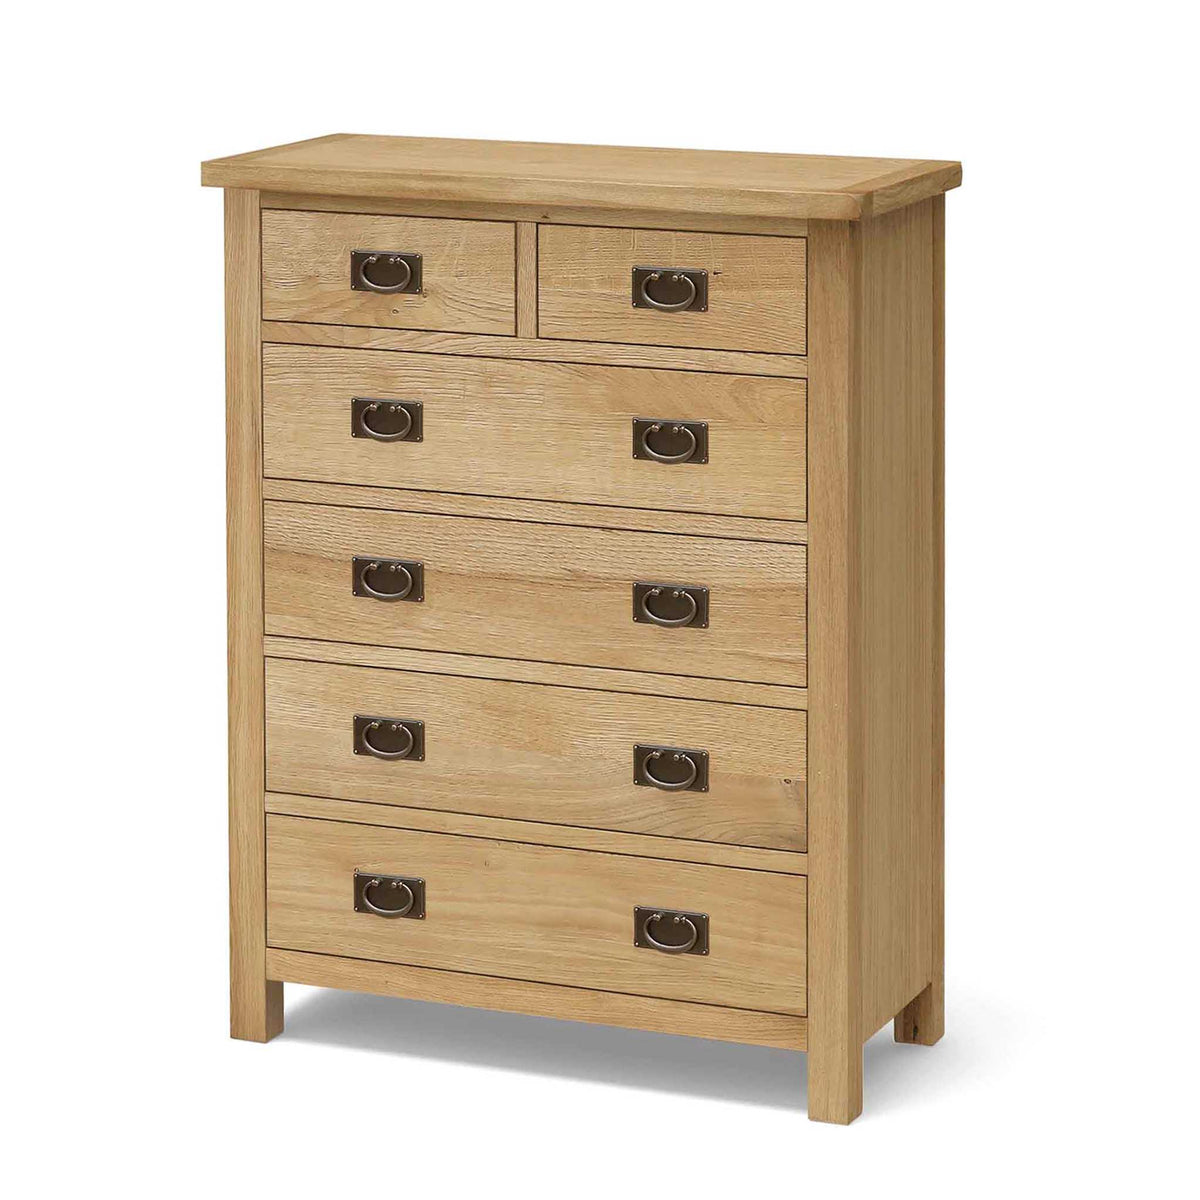 Surrey Oak 2 Over 4 Chest of Drawers  